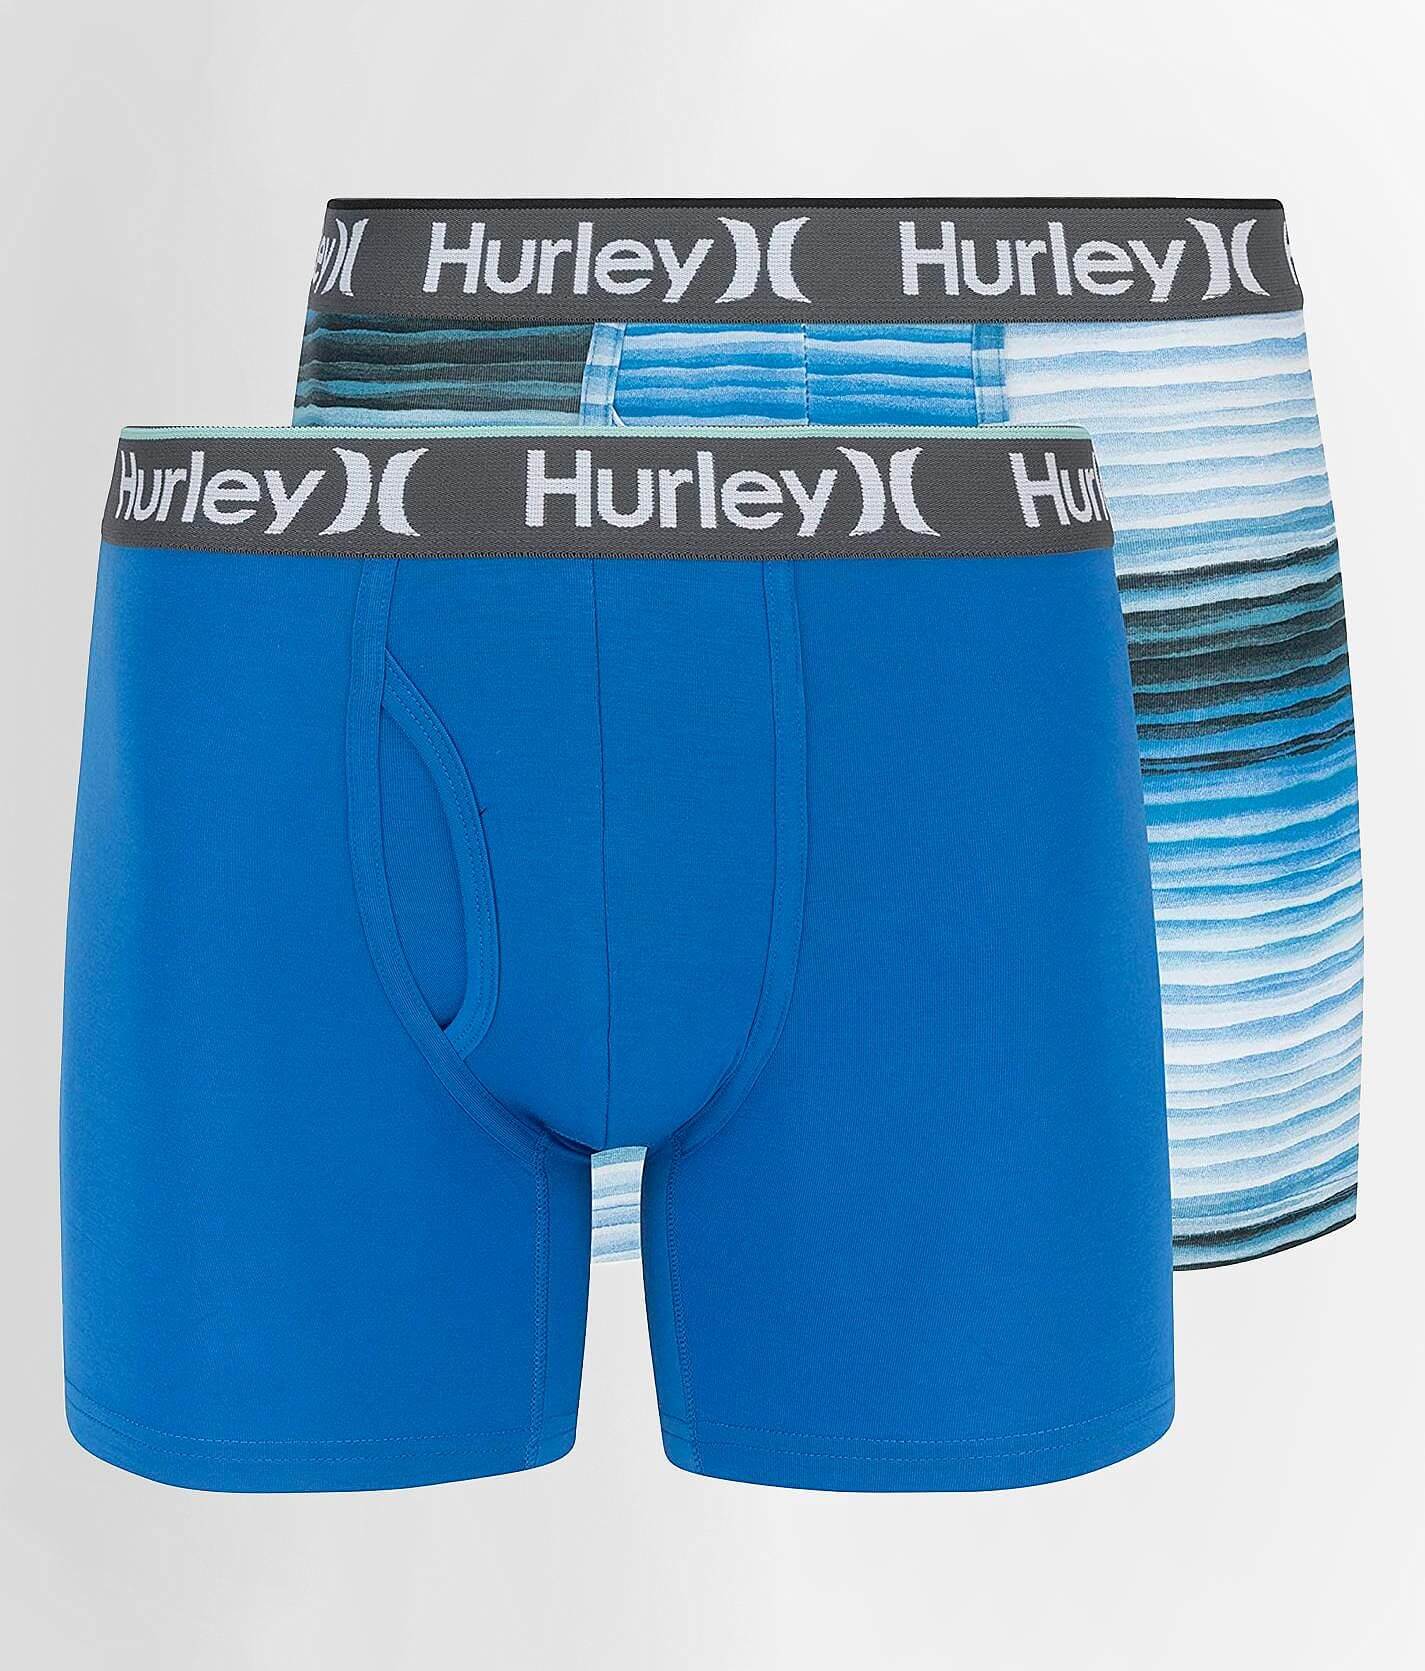 Hurley 2 Pack Everyday Stretch Boxer Briefs - Men's Boxers in